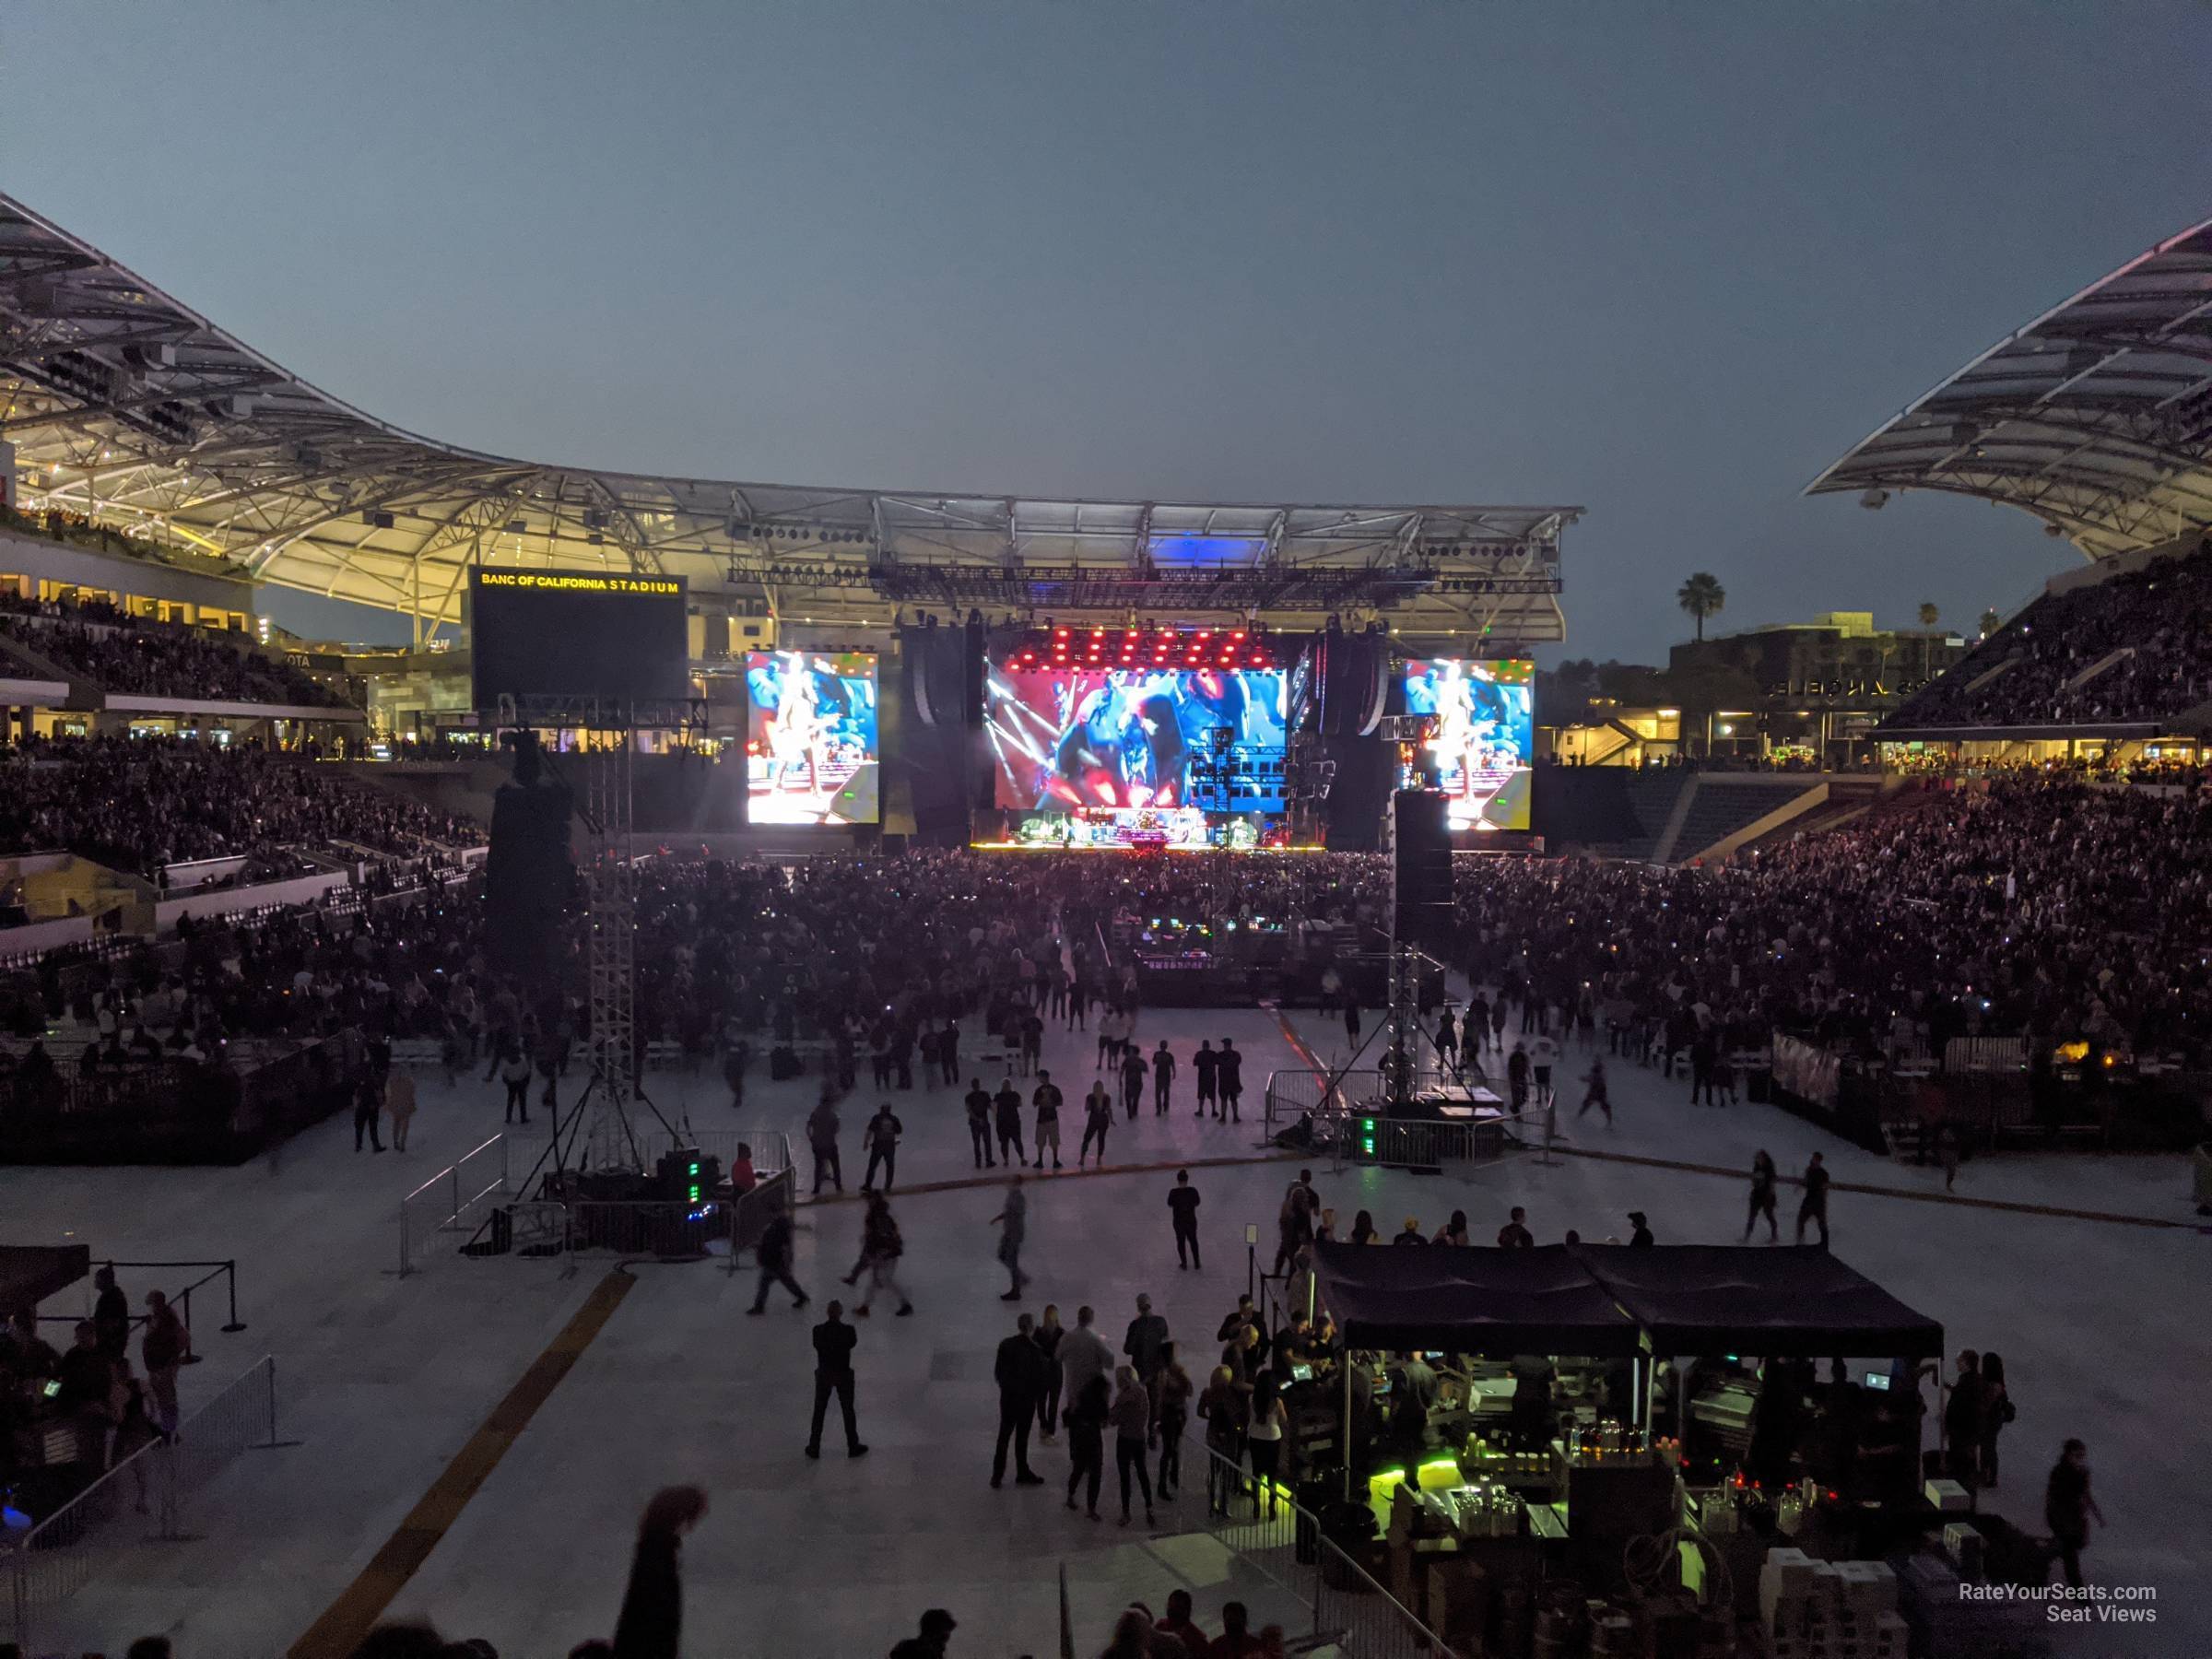 section 123 seat view  for concert - bmo stadium